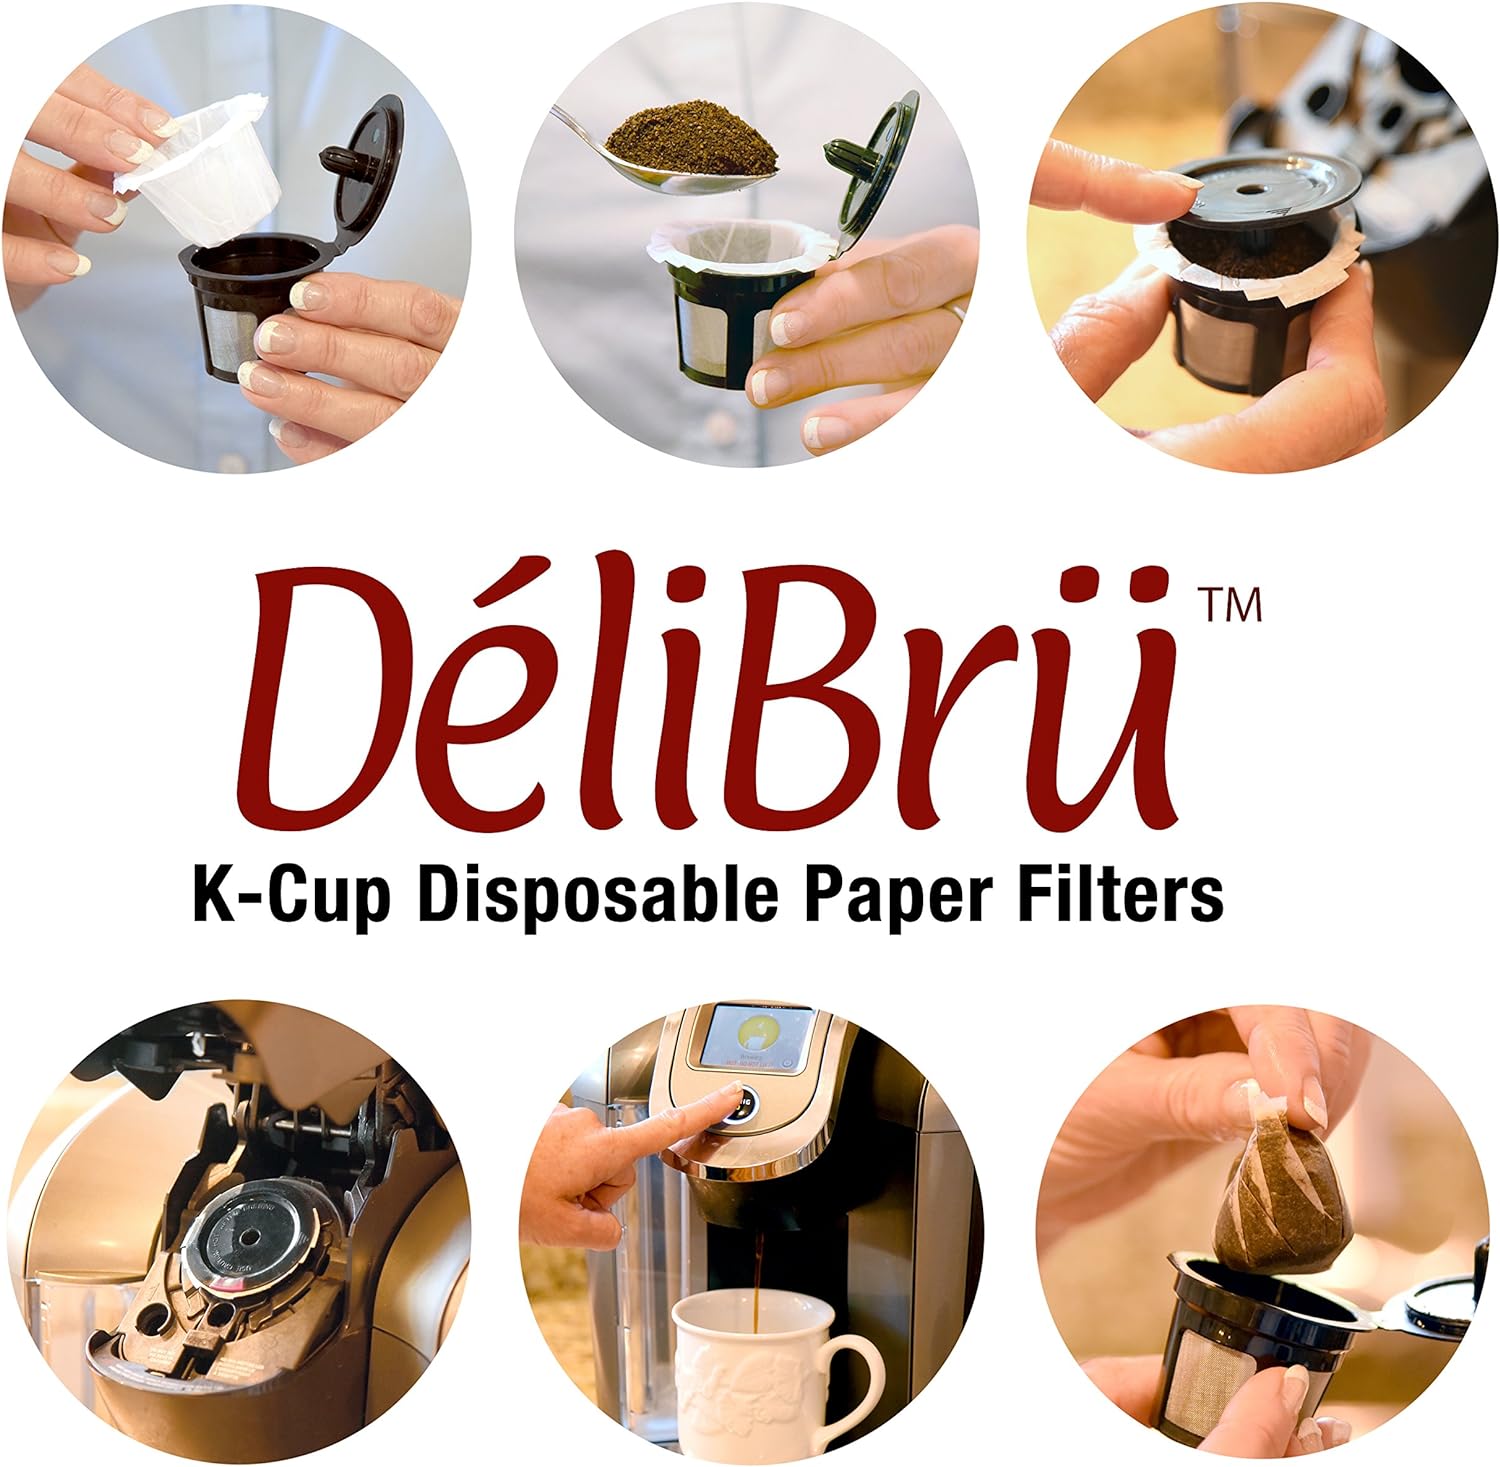 K Cup Filters - Pack of 300 - Fits With All Reusable Coffee Pods - Compostable and Disposable Coffee Filters for Keurig Single Cup by Delibru